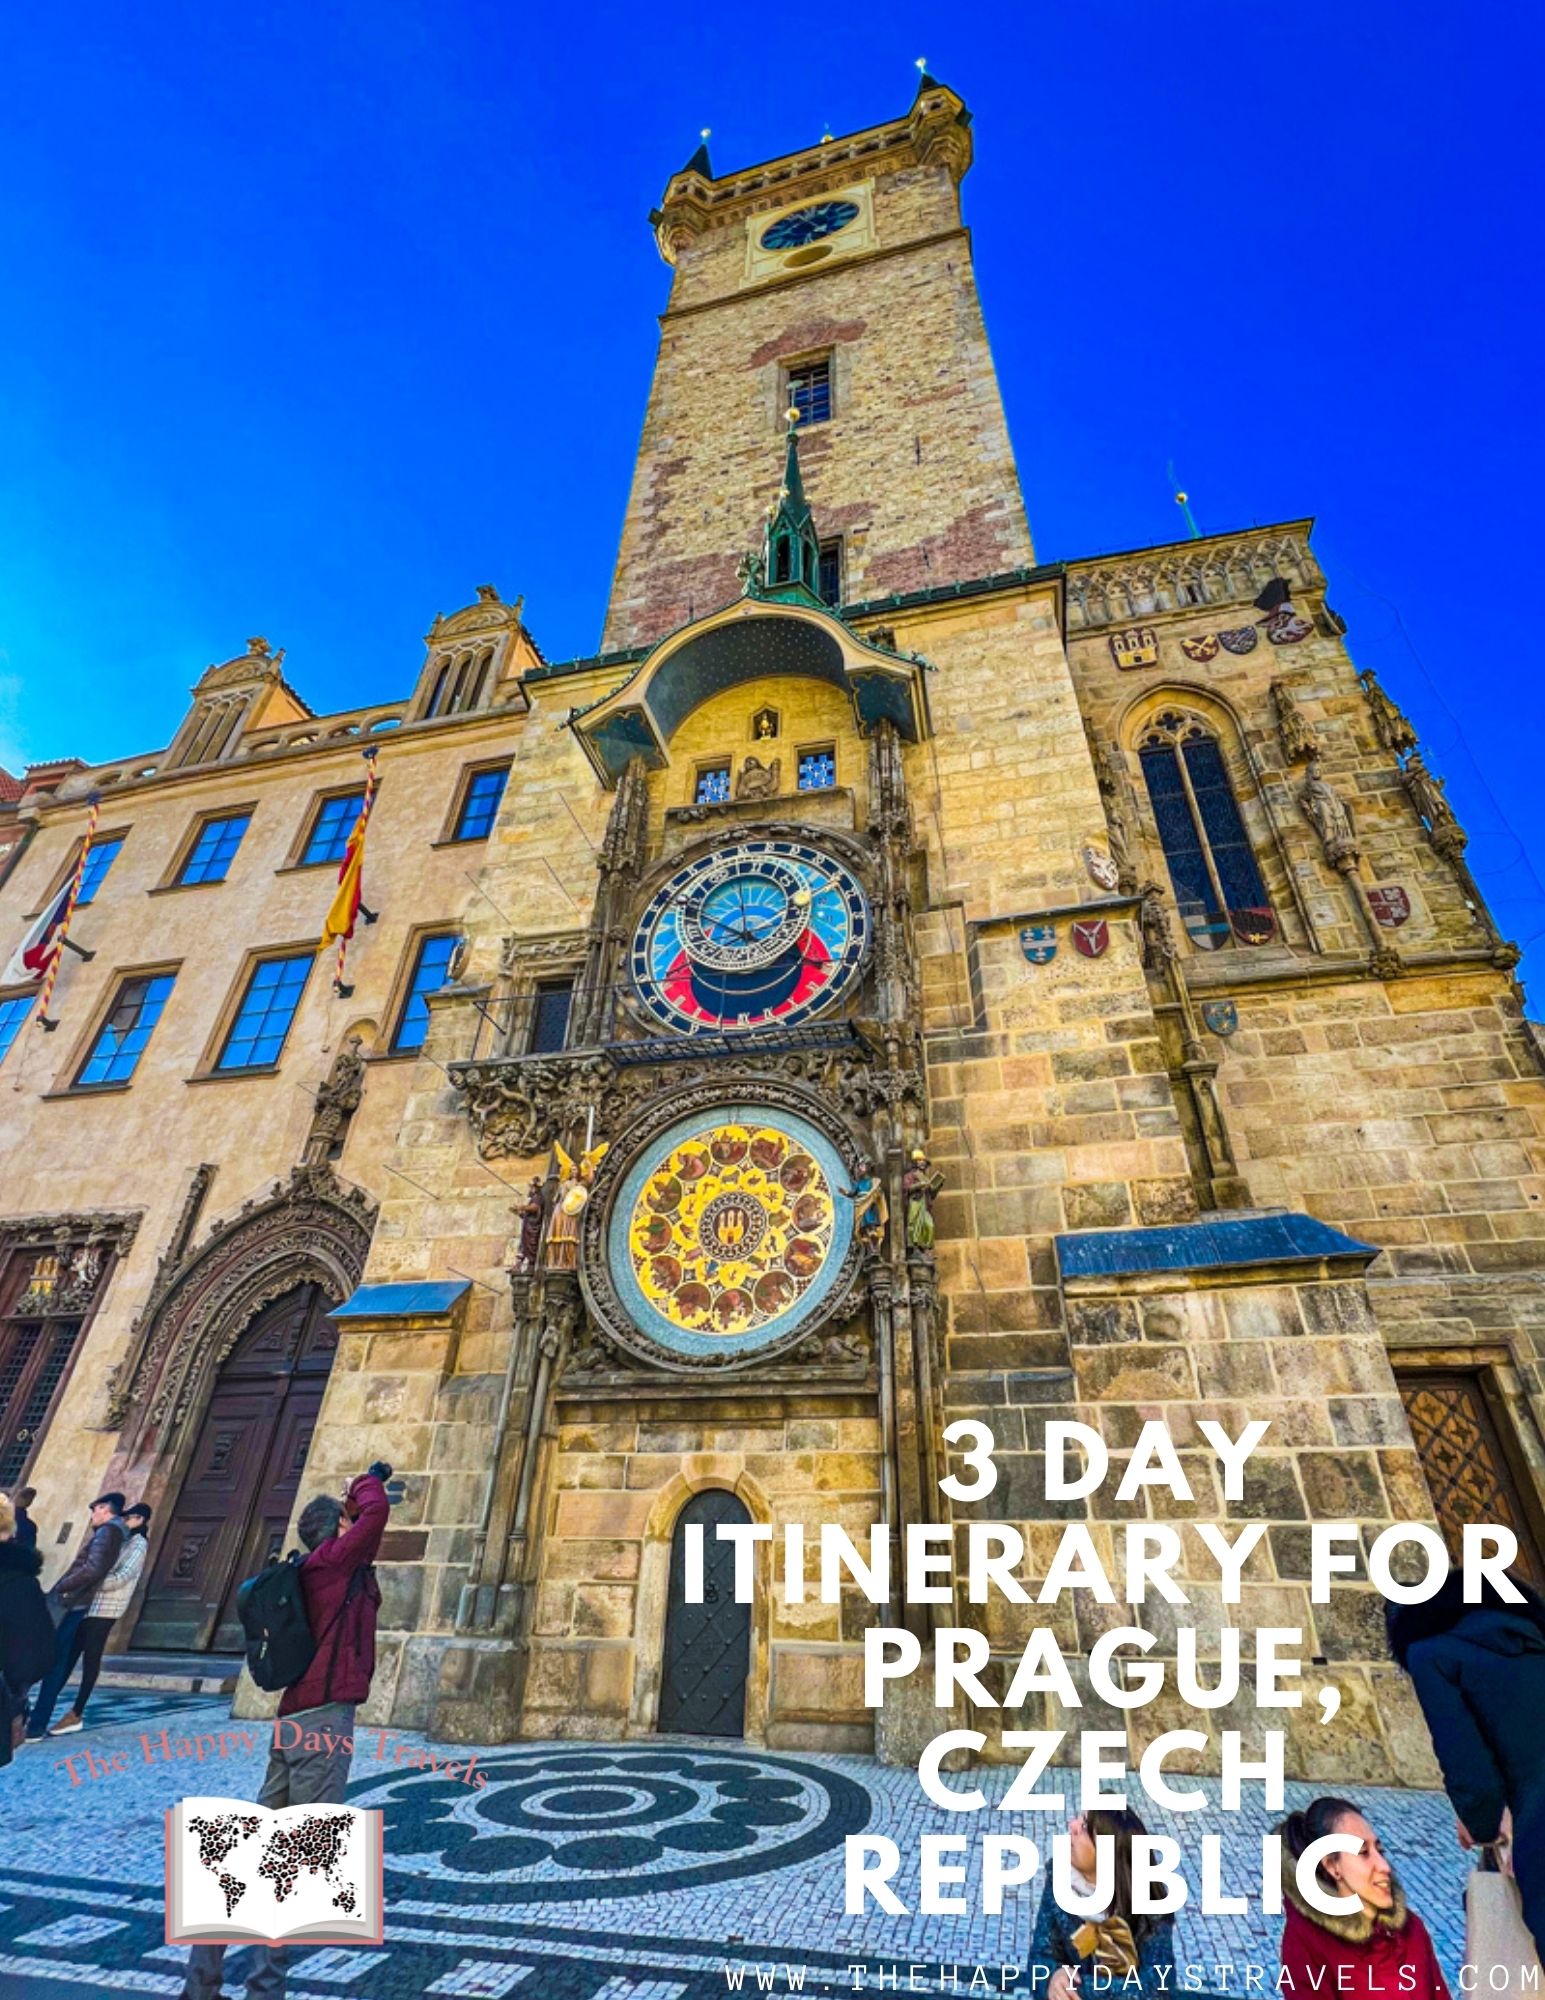 Pin image of Astronomical Clock with text '3 day itinerary for Prague, Czech Republic' in bottom right hand corner.